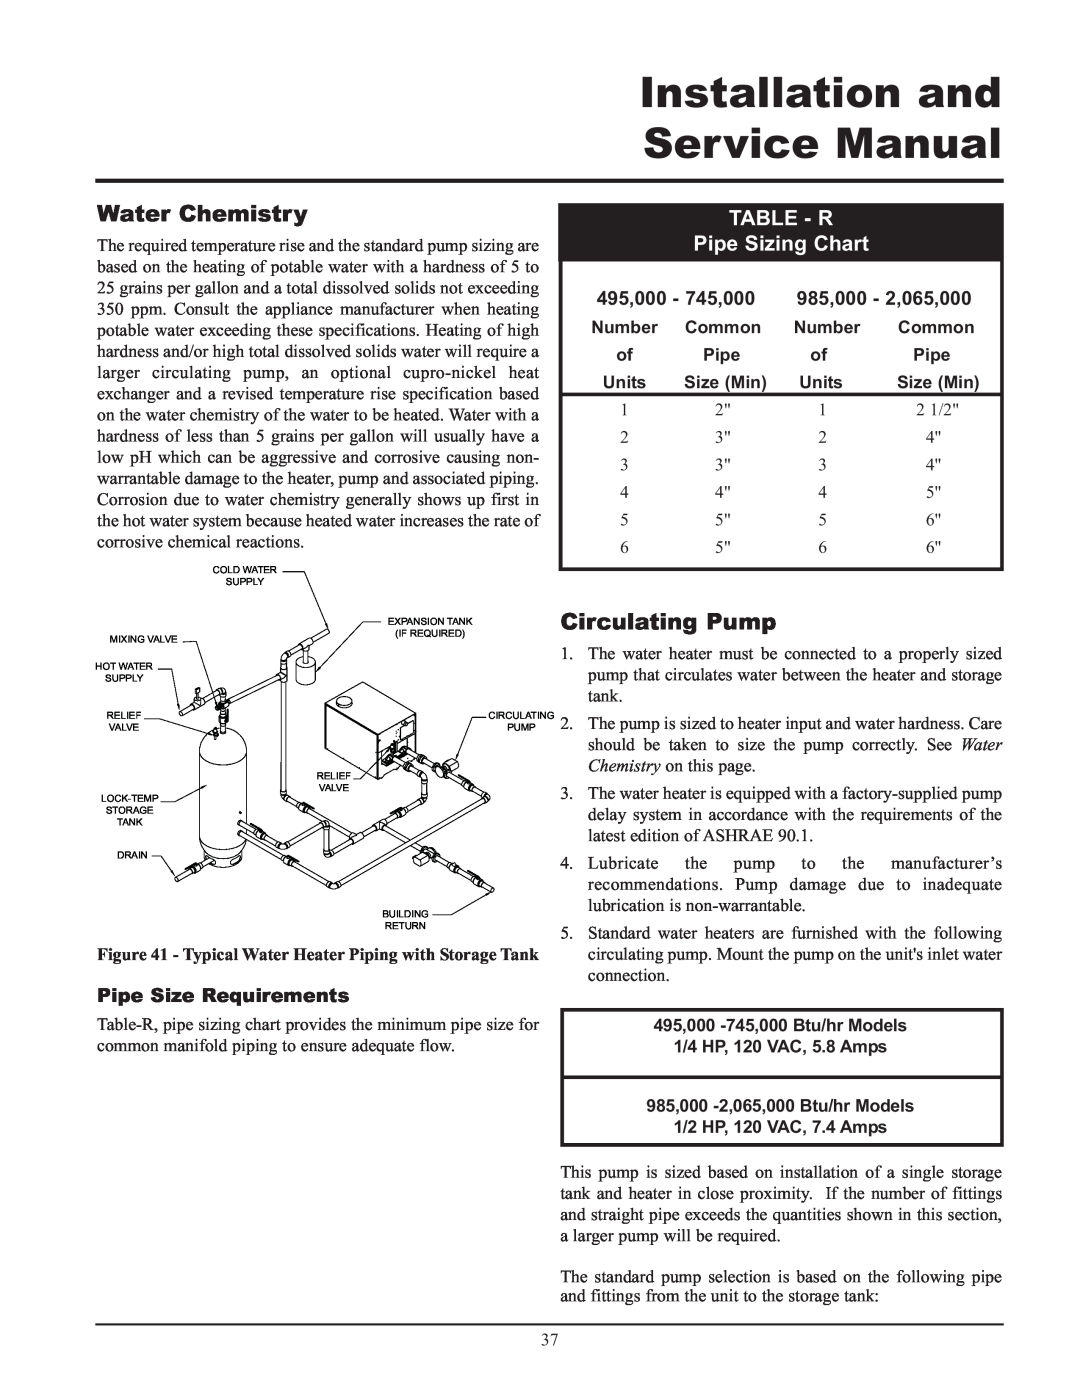 Lochinvar Water Chemistry, Circulating Pump, TABLE - R Pipe Sizing Chart, 495,000 - 745,000 985,000 - 2,065,000 